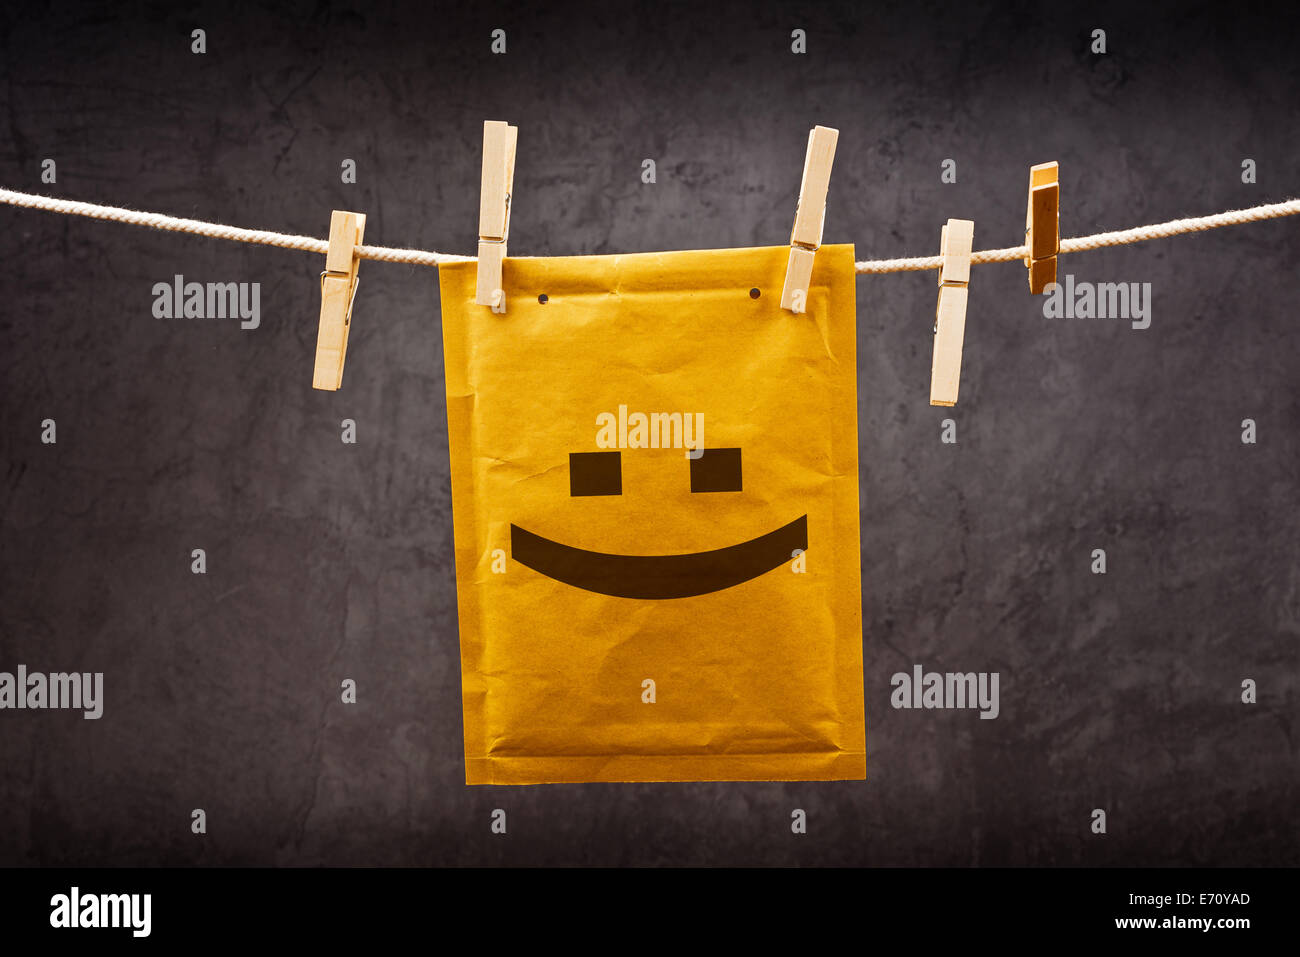 Happy face emoticon on Postal mail Envelope hanging on rope attached with clothes pins. Good news concept. Stock Photo